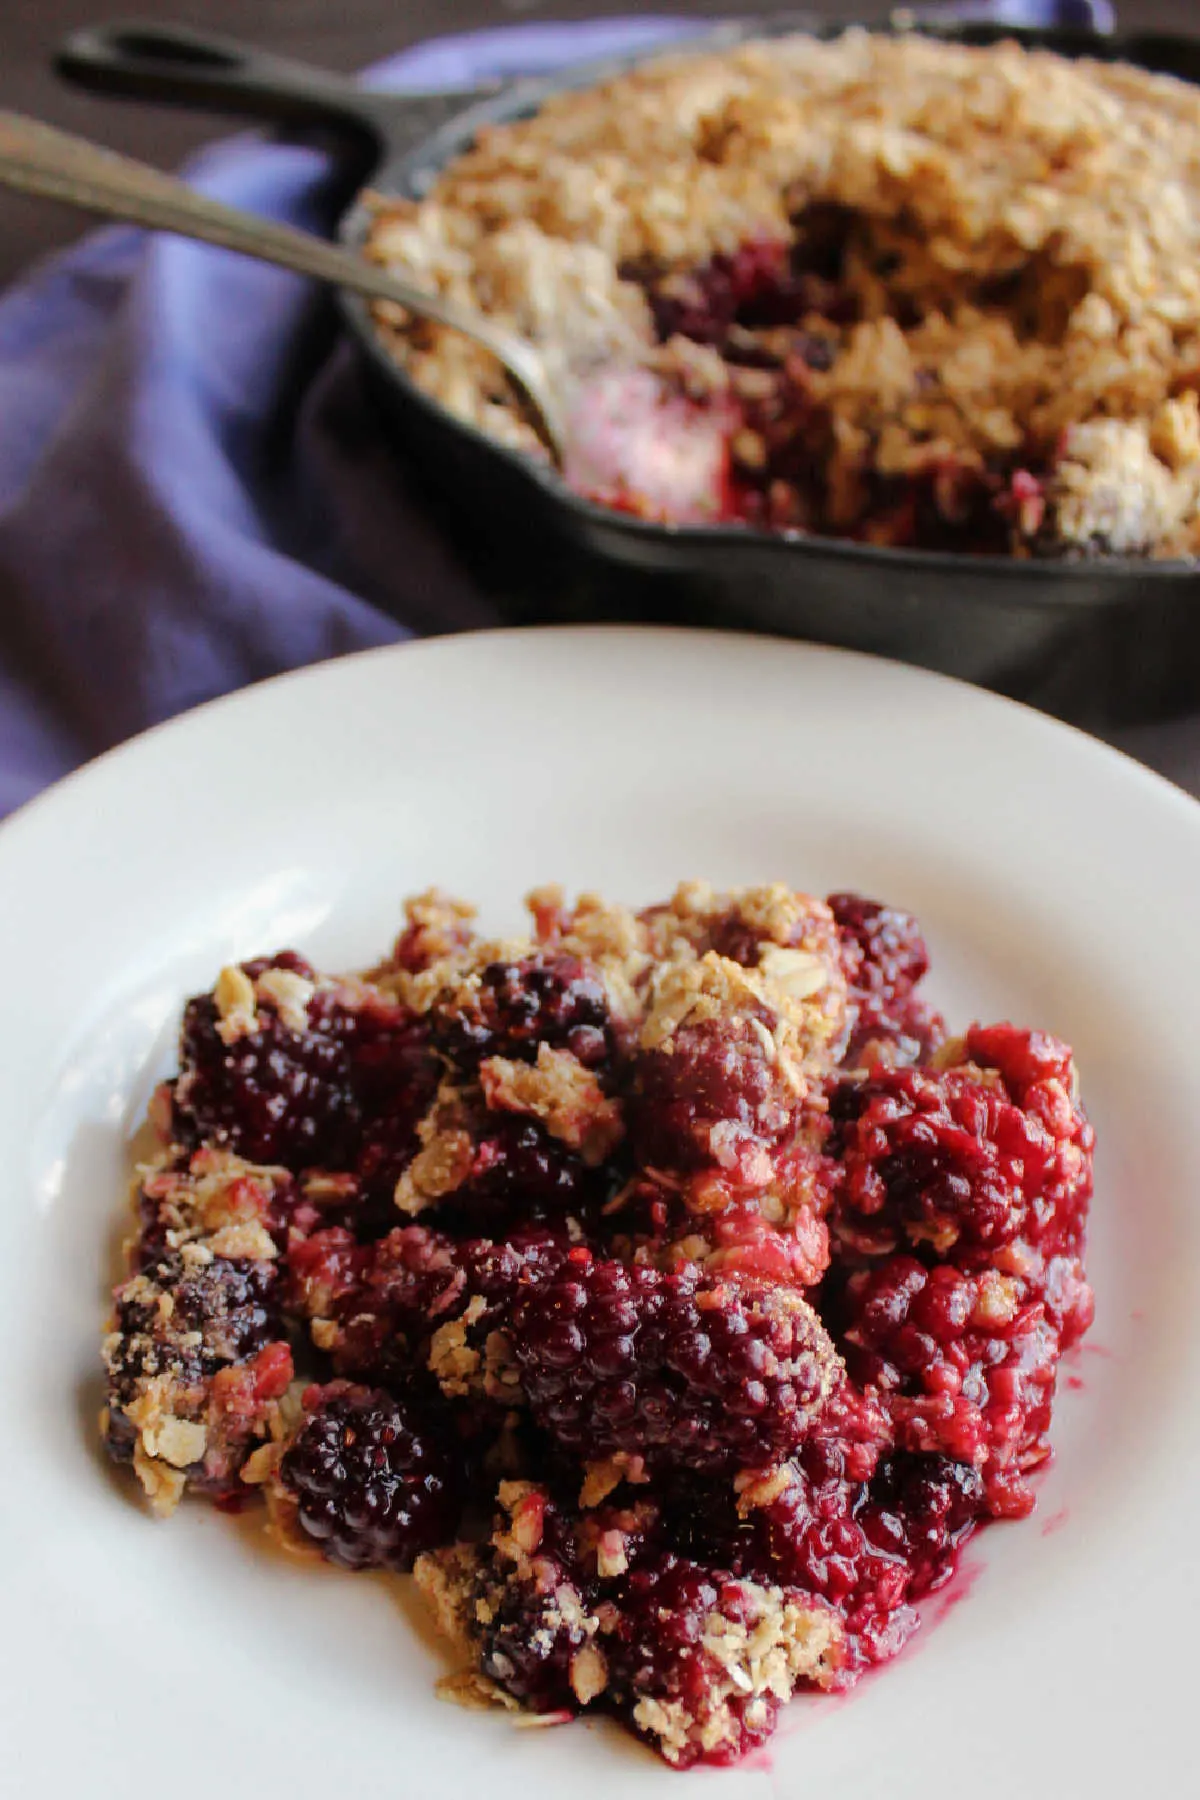 serving of blackberry crisp with oatmeal topping on plate.